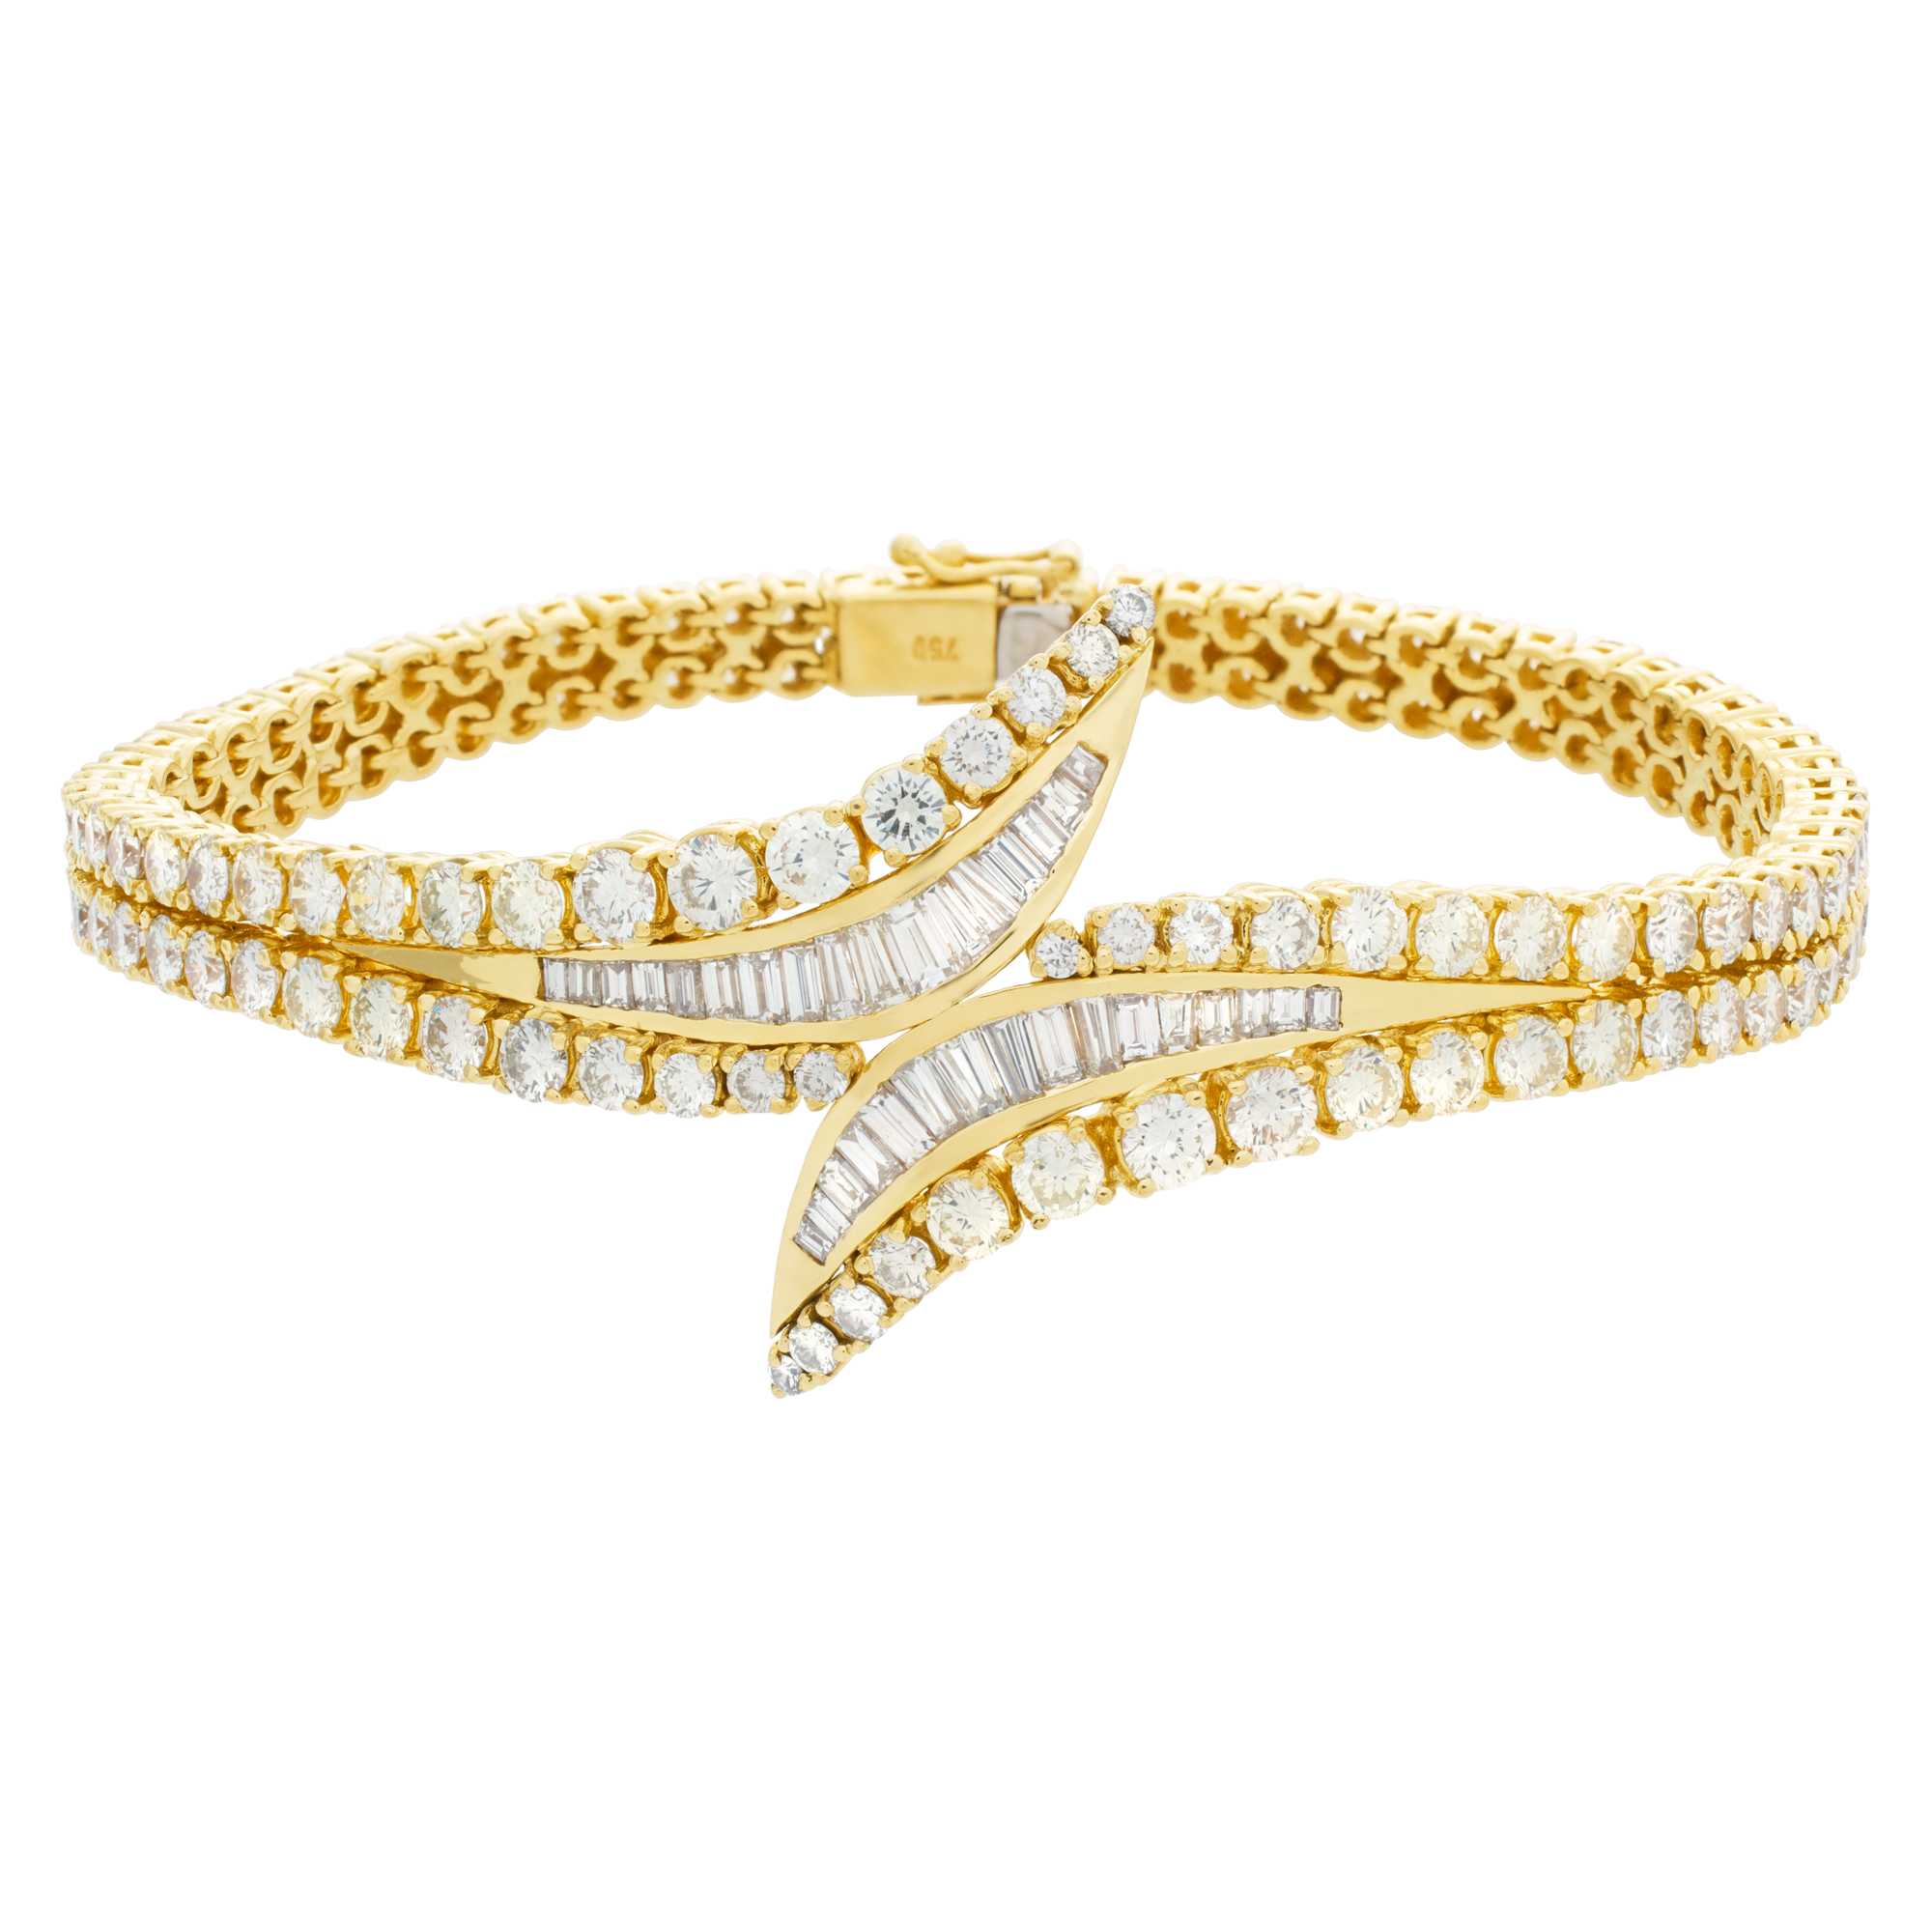 Breathtaking diamond bracelet in 18k with approximately over 9 carats in full round brlliant and baguette diamonds